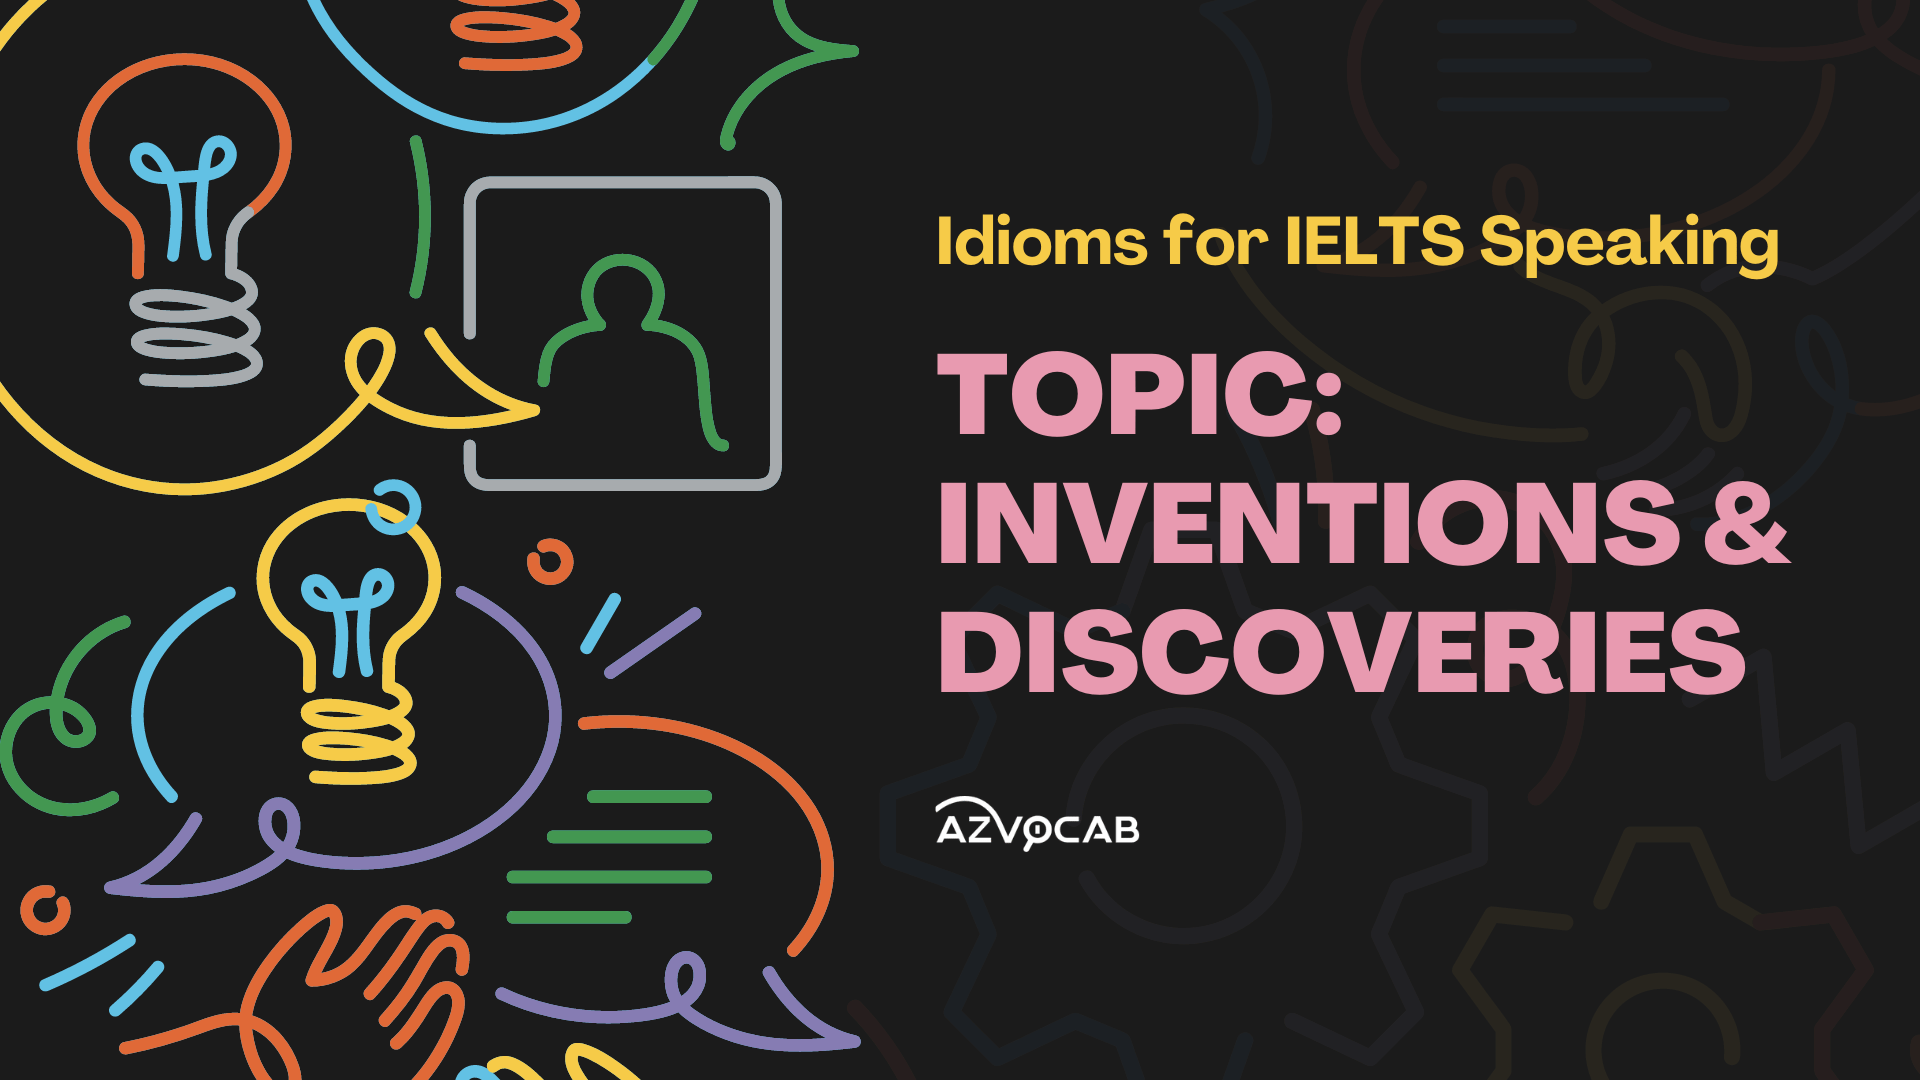 Idioms for IELTS Speaking Inventions and Discoveries